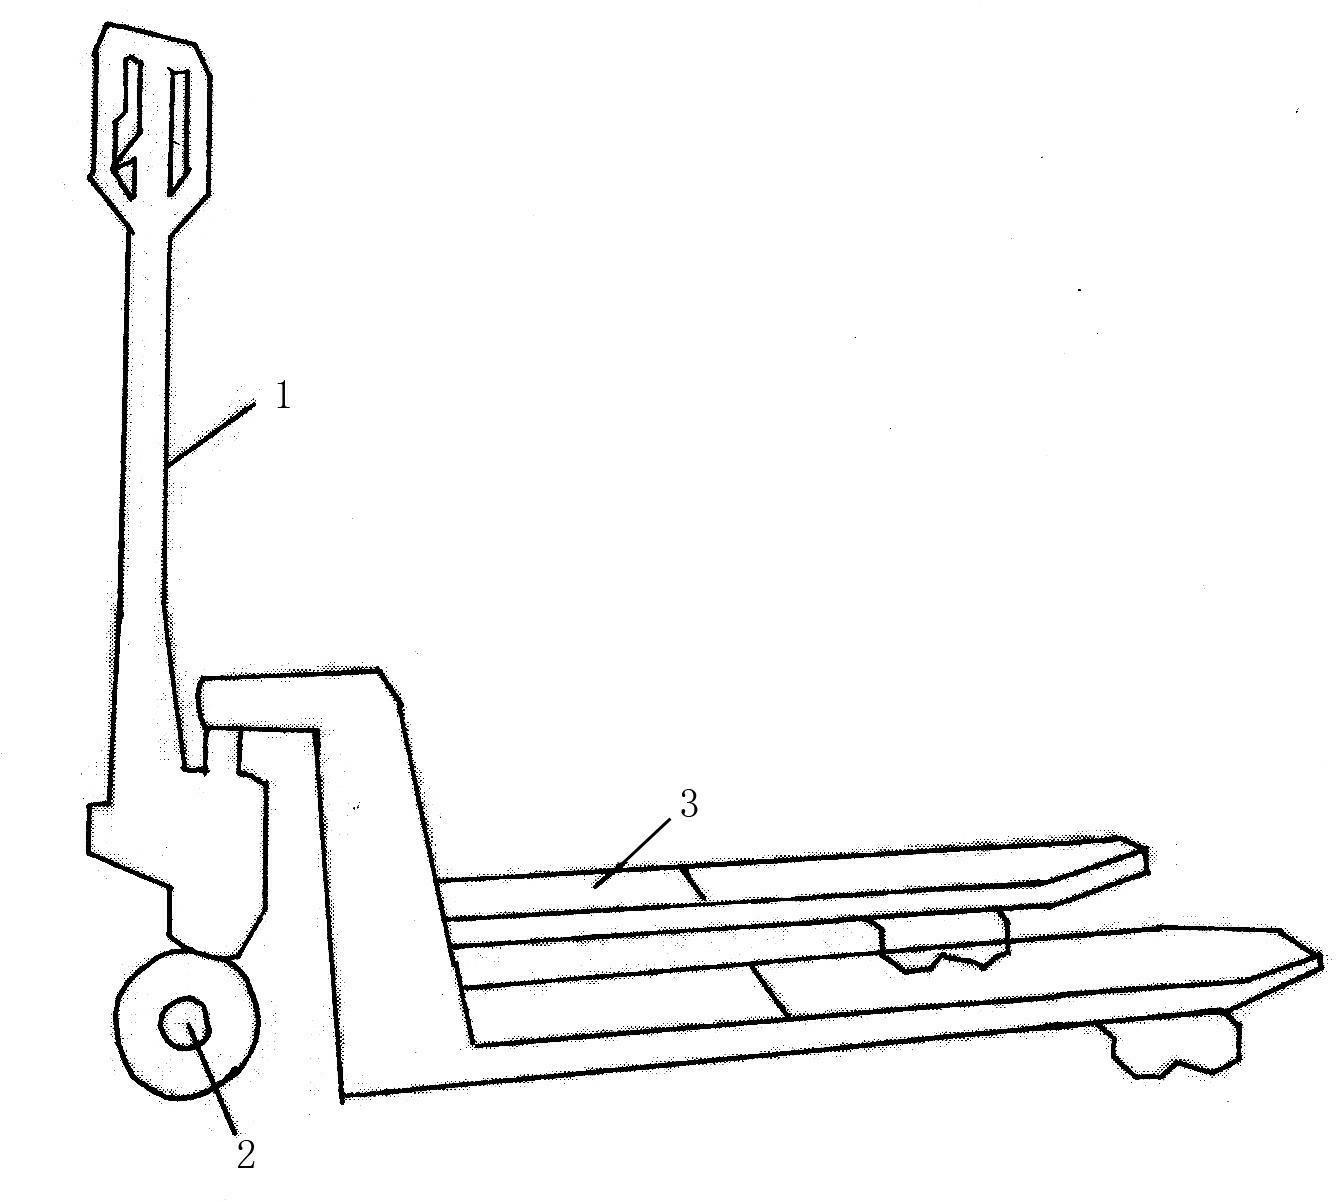 Tray-type hand-pushed forklift